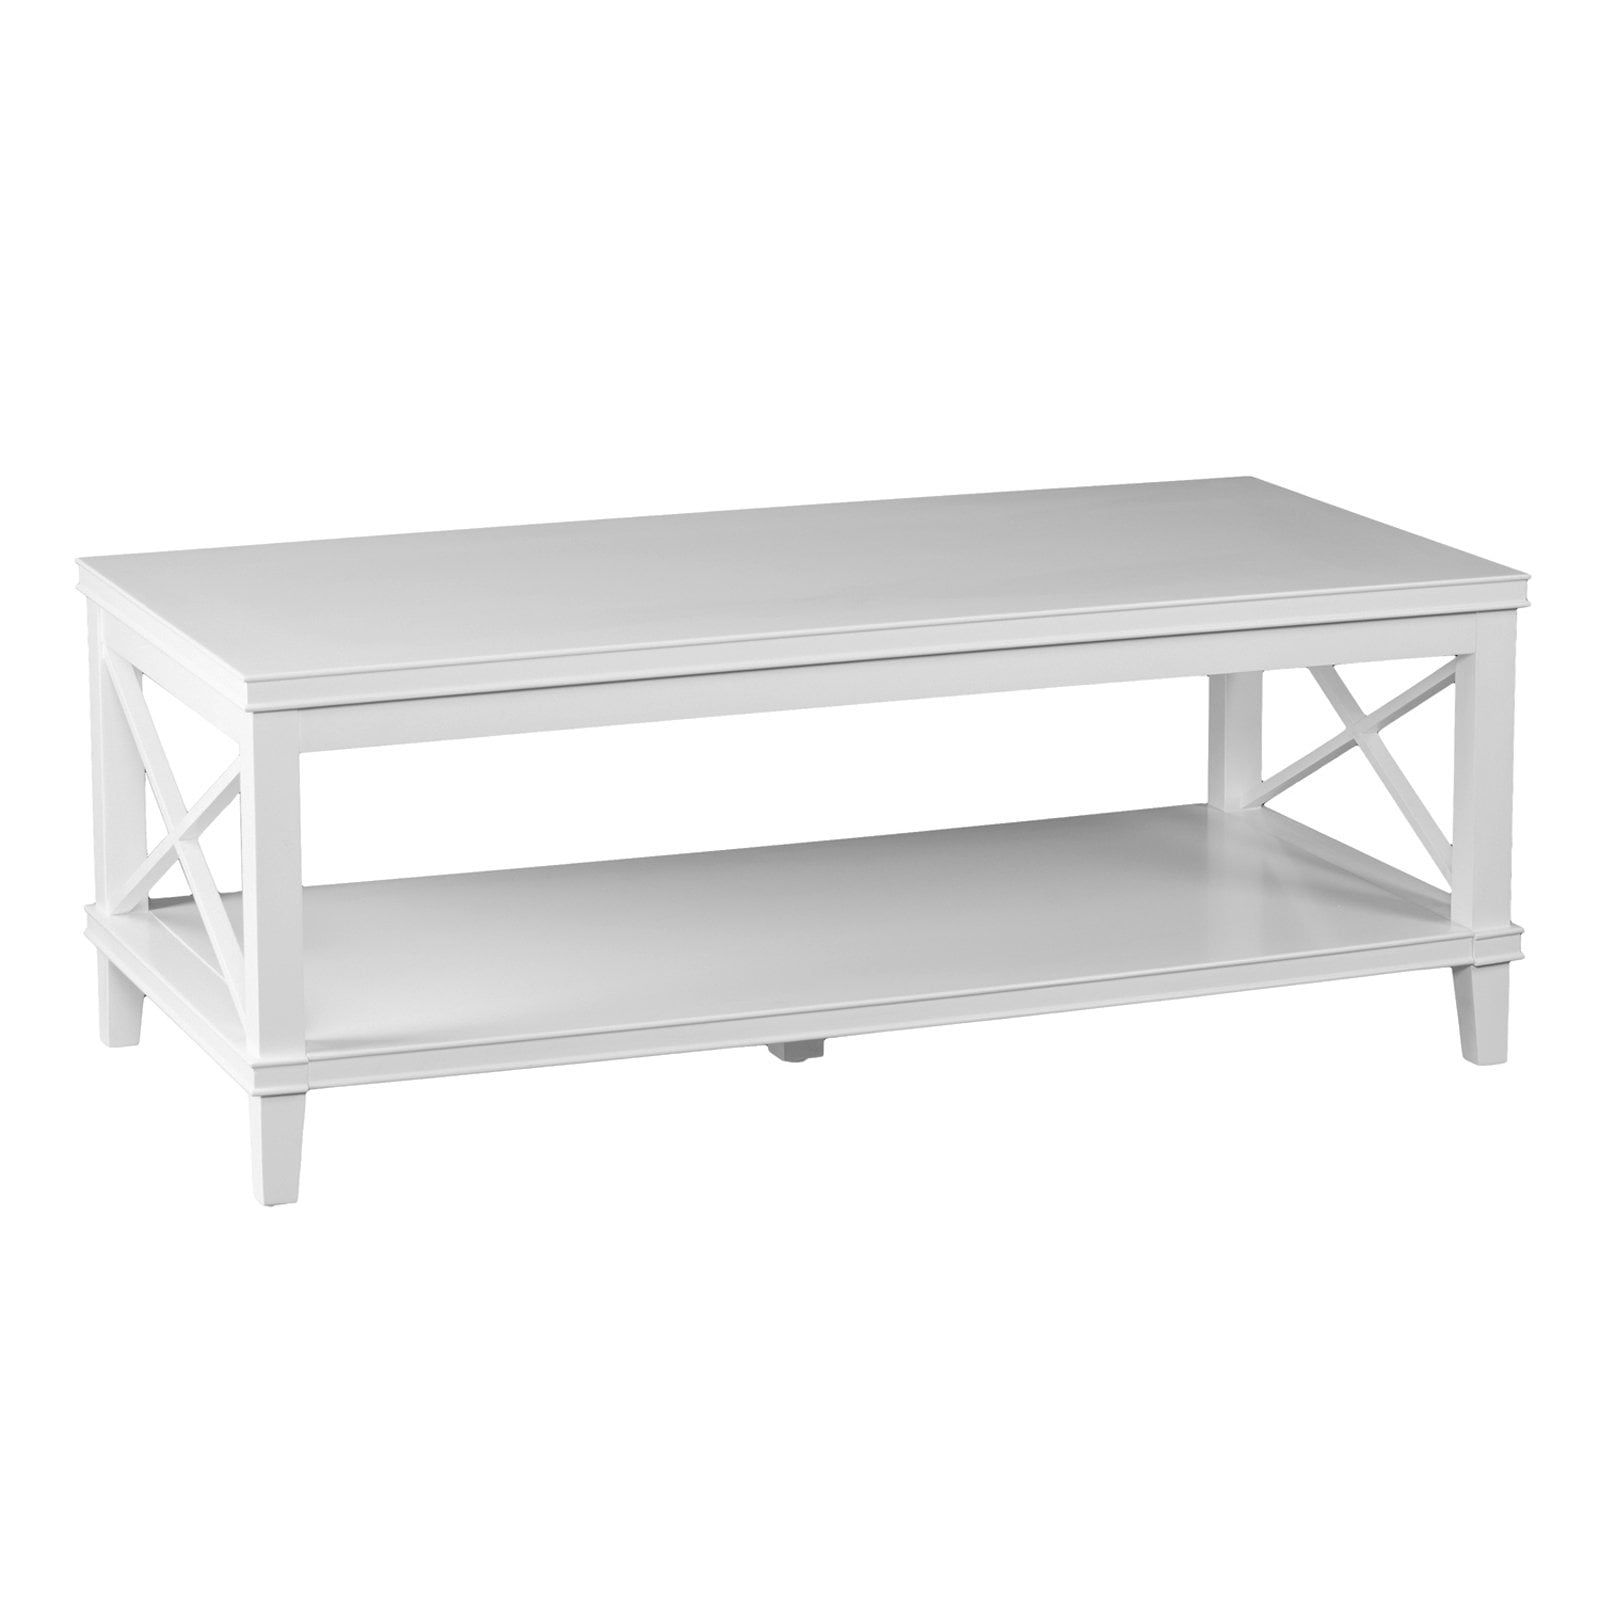 Southern Enterprises Larksmill Coffee Table – Walmart Inside Southern Enterprises Larksmill Coffee Tables (View 3 of 6)